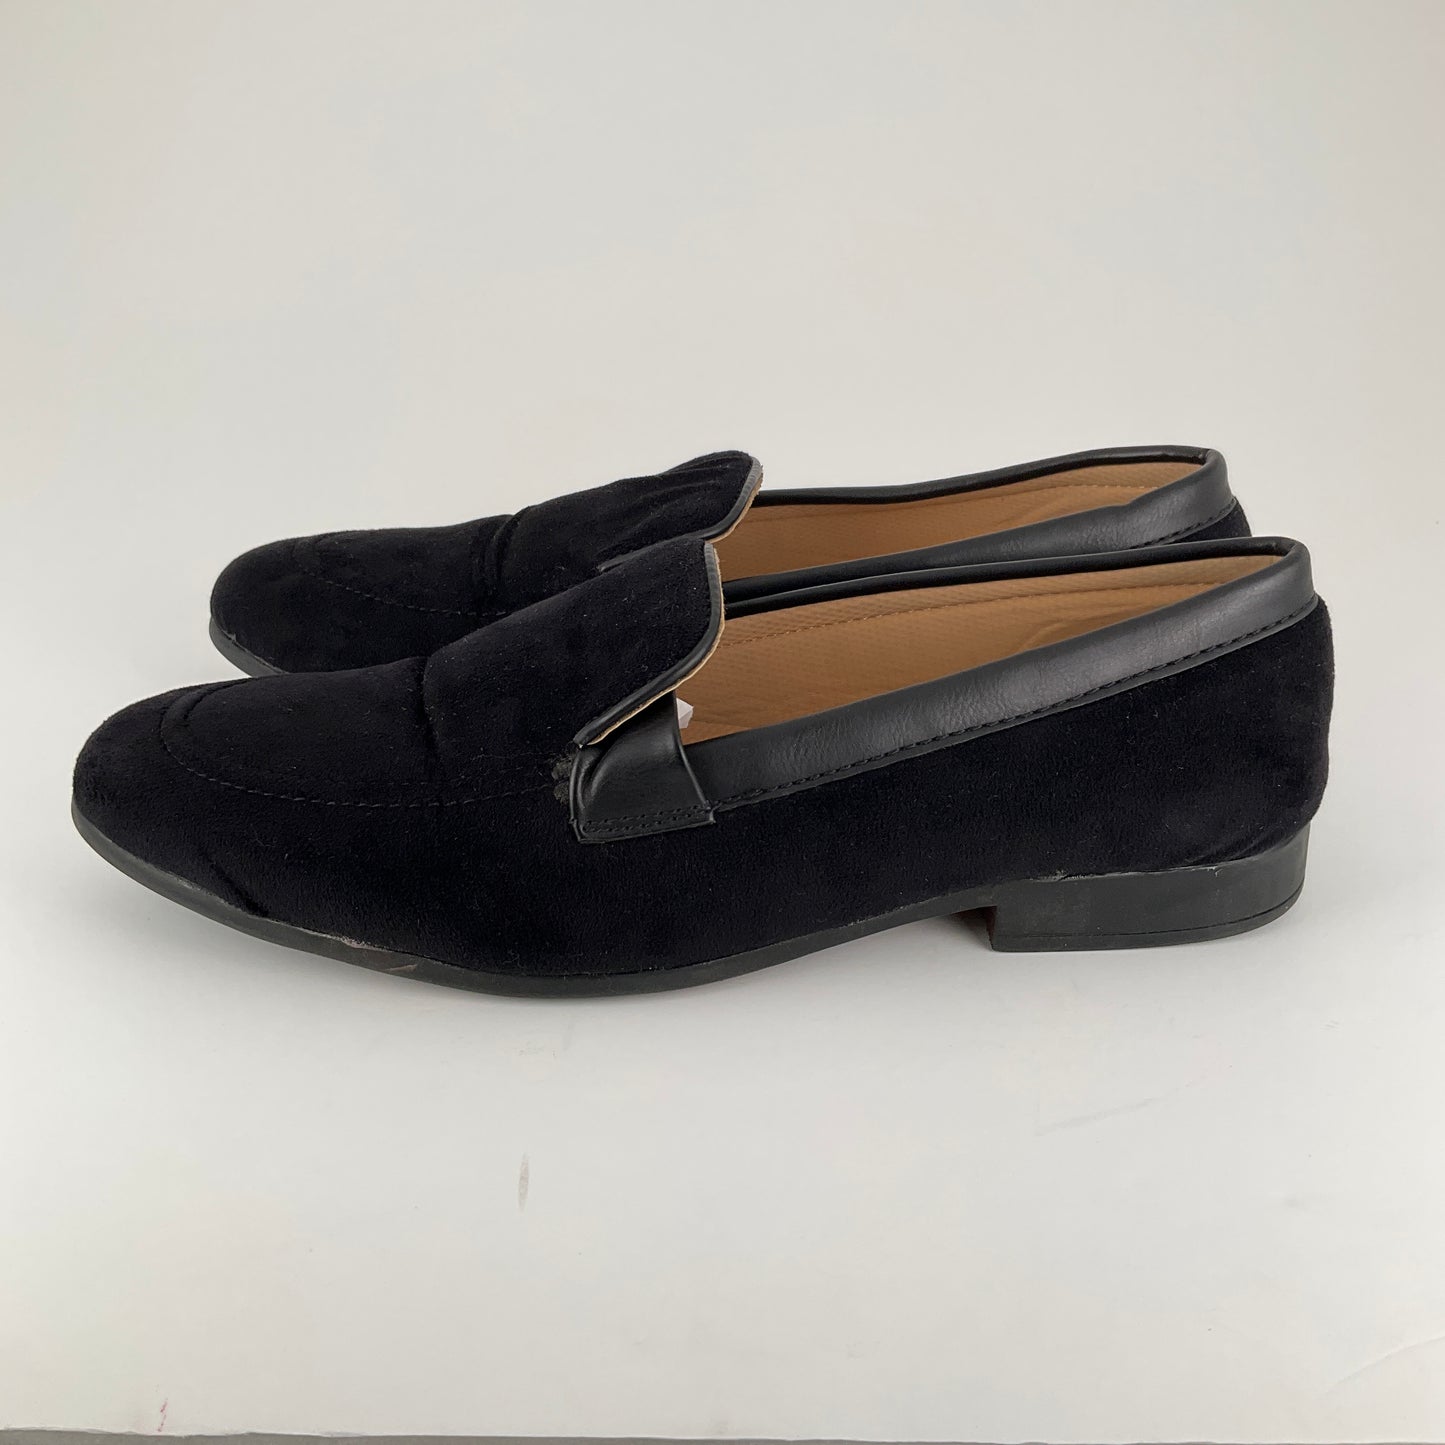 Gucci - Loafer - Size 41